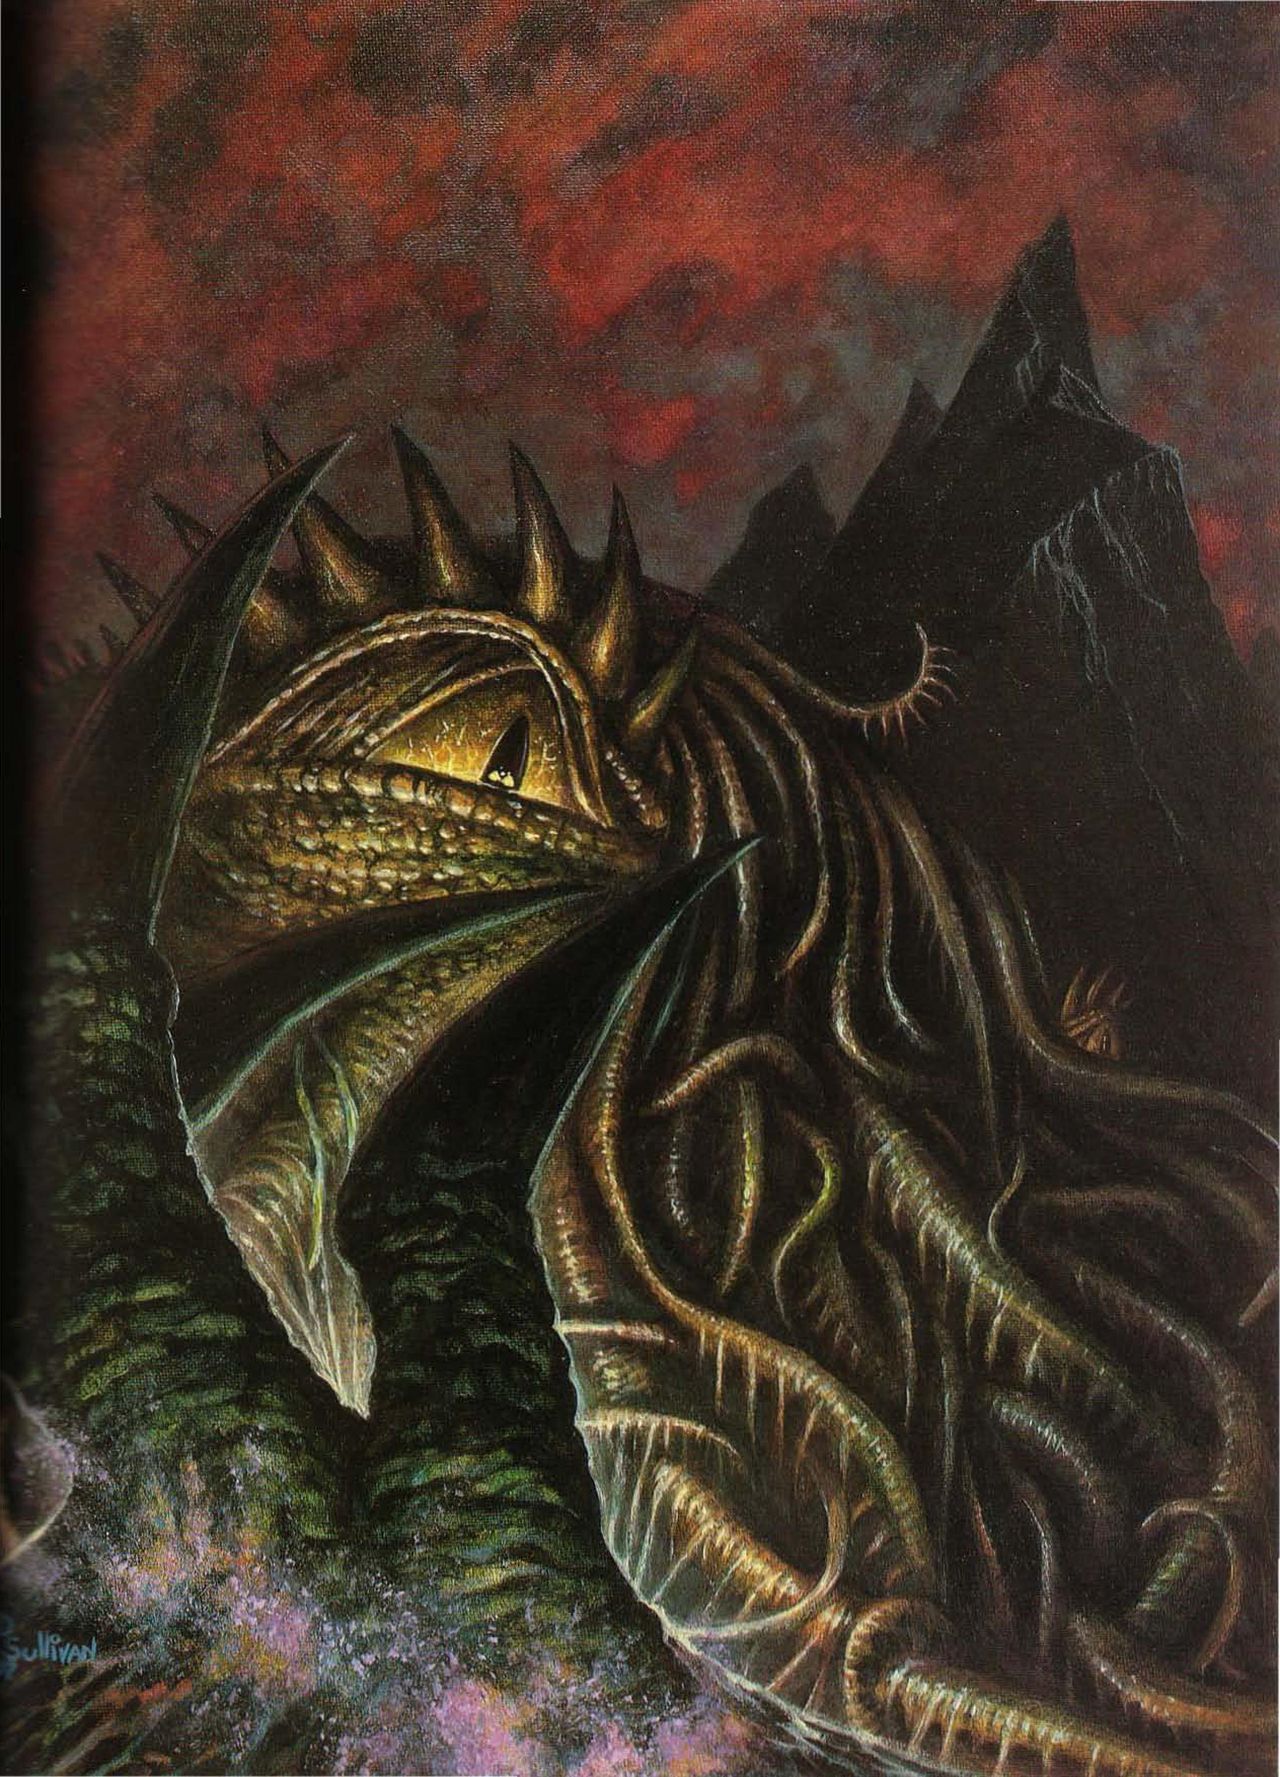 S. Petersen's Field Guide to Lovecraftian Horrors 15